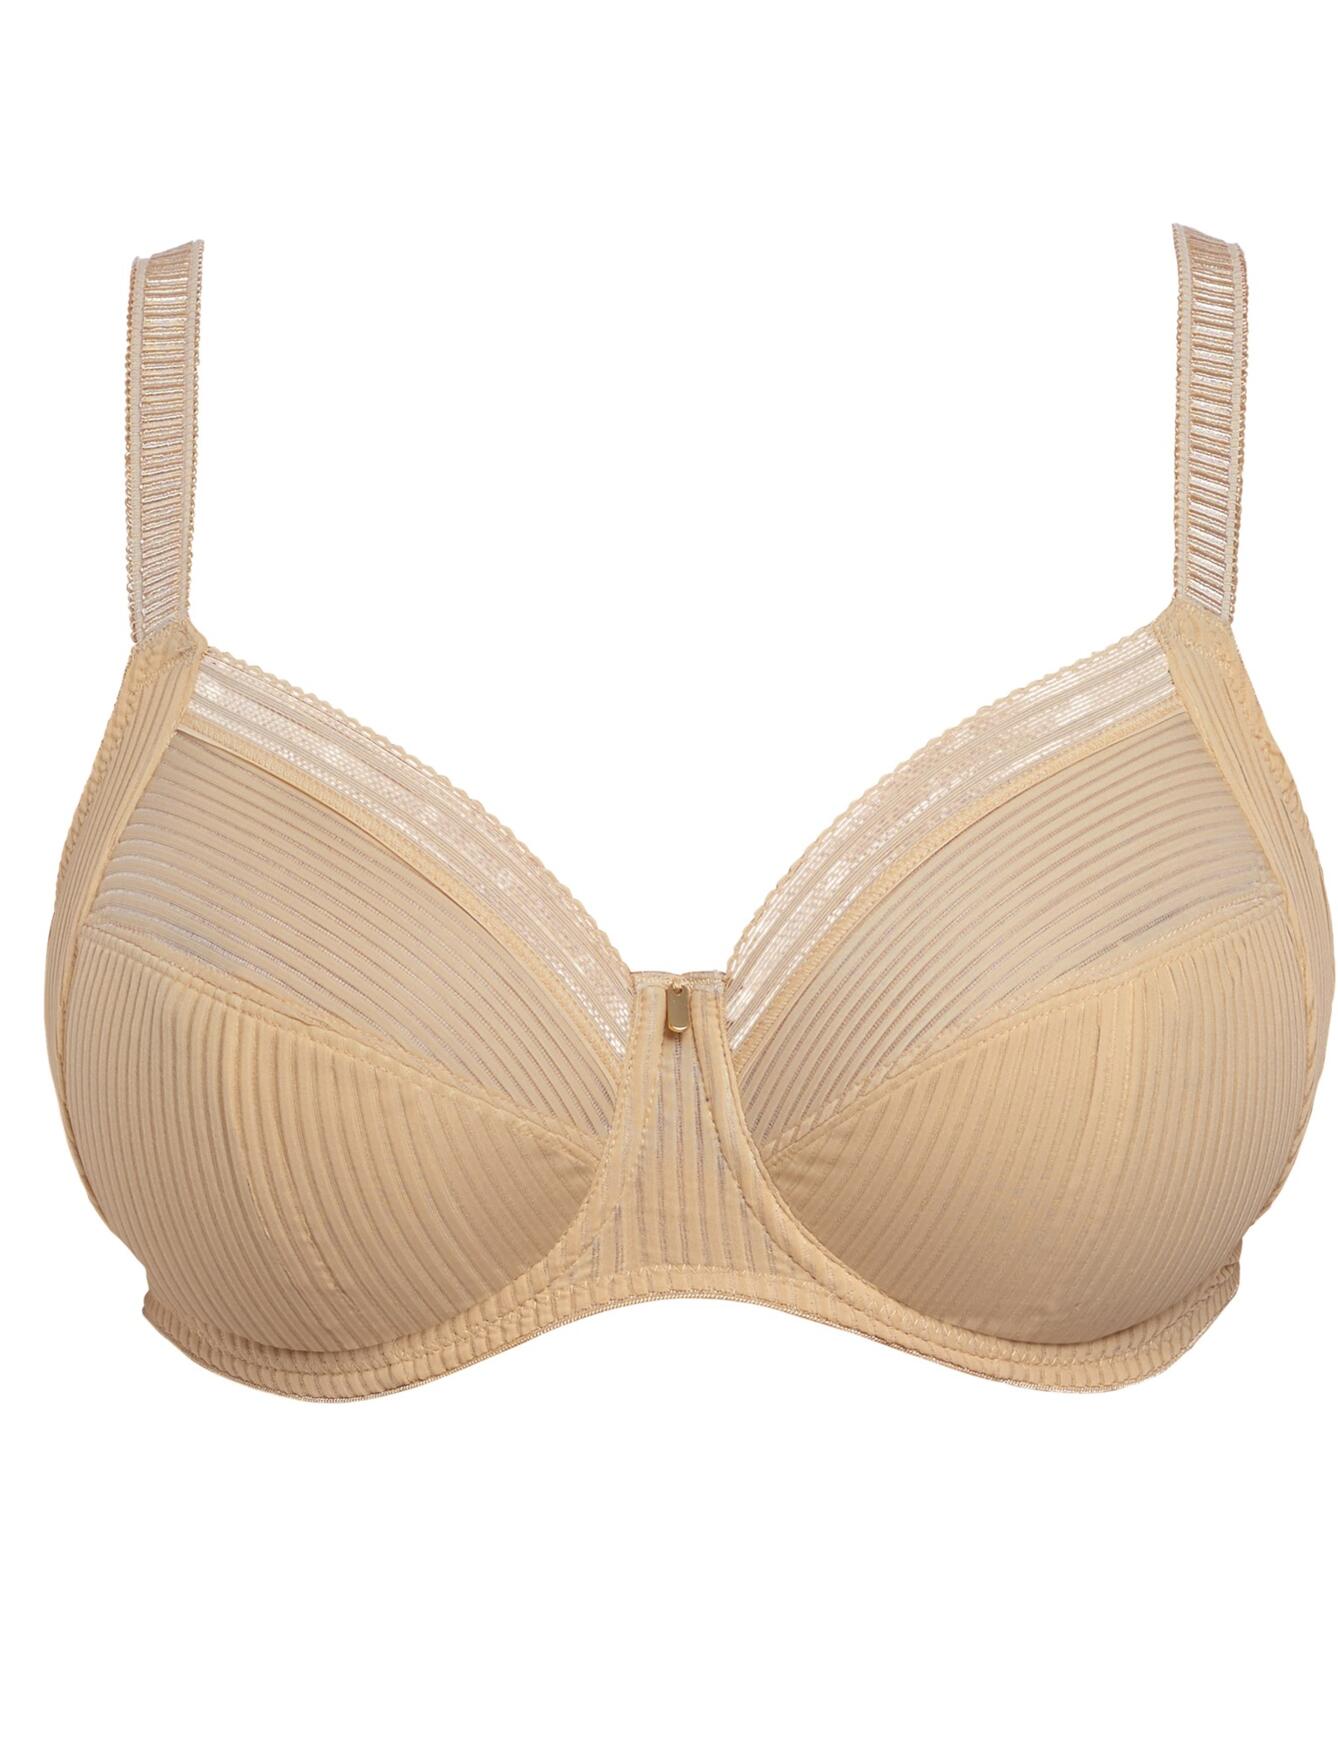 Fantasie Fusion : Full Cup Side Support Bra FL3091